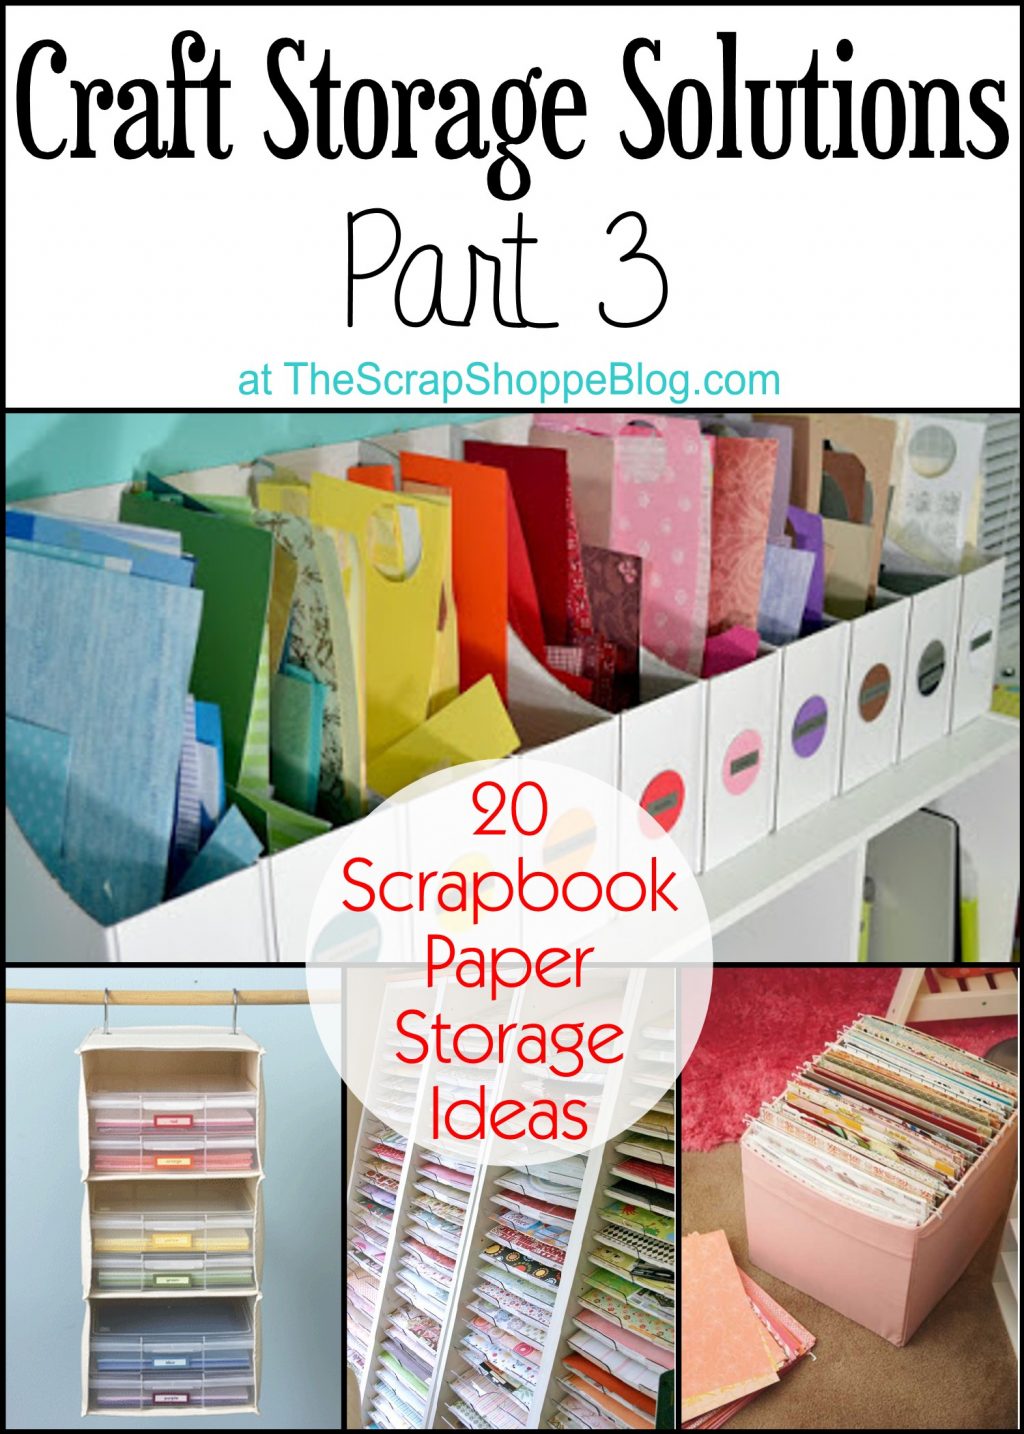 Smart Storage Solutions for Your Scrapbooking Tools